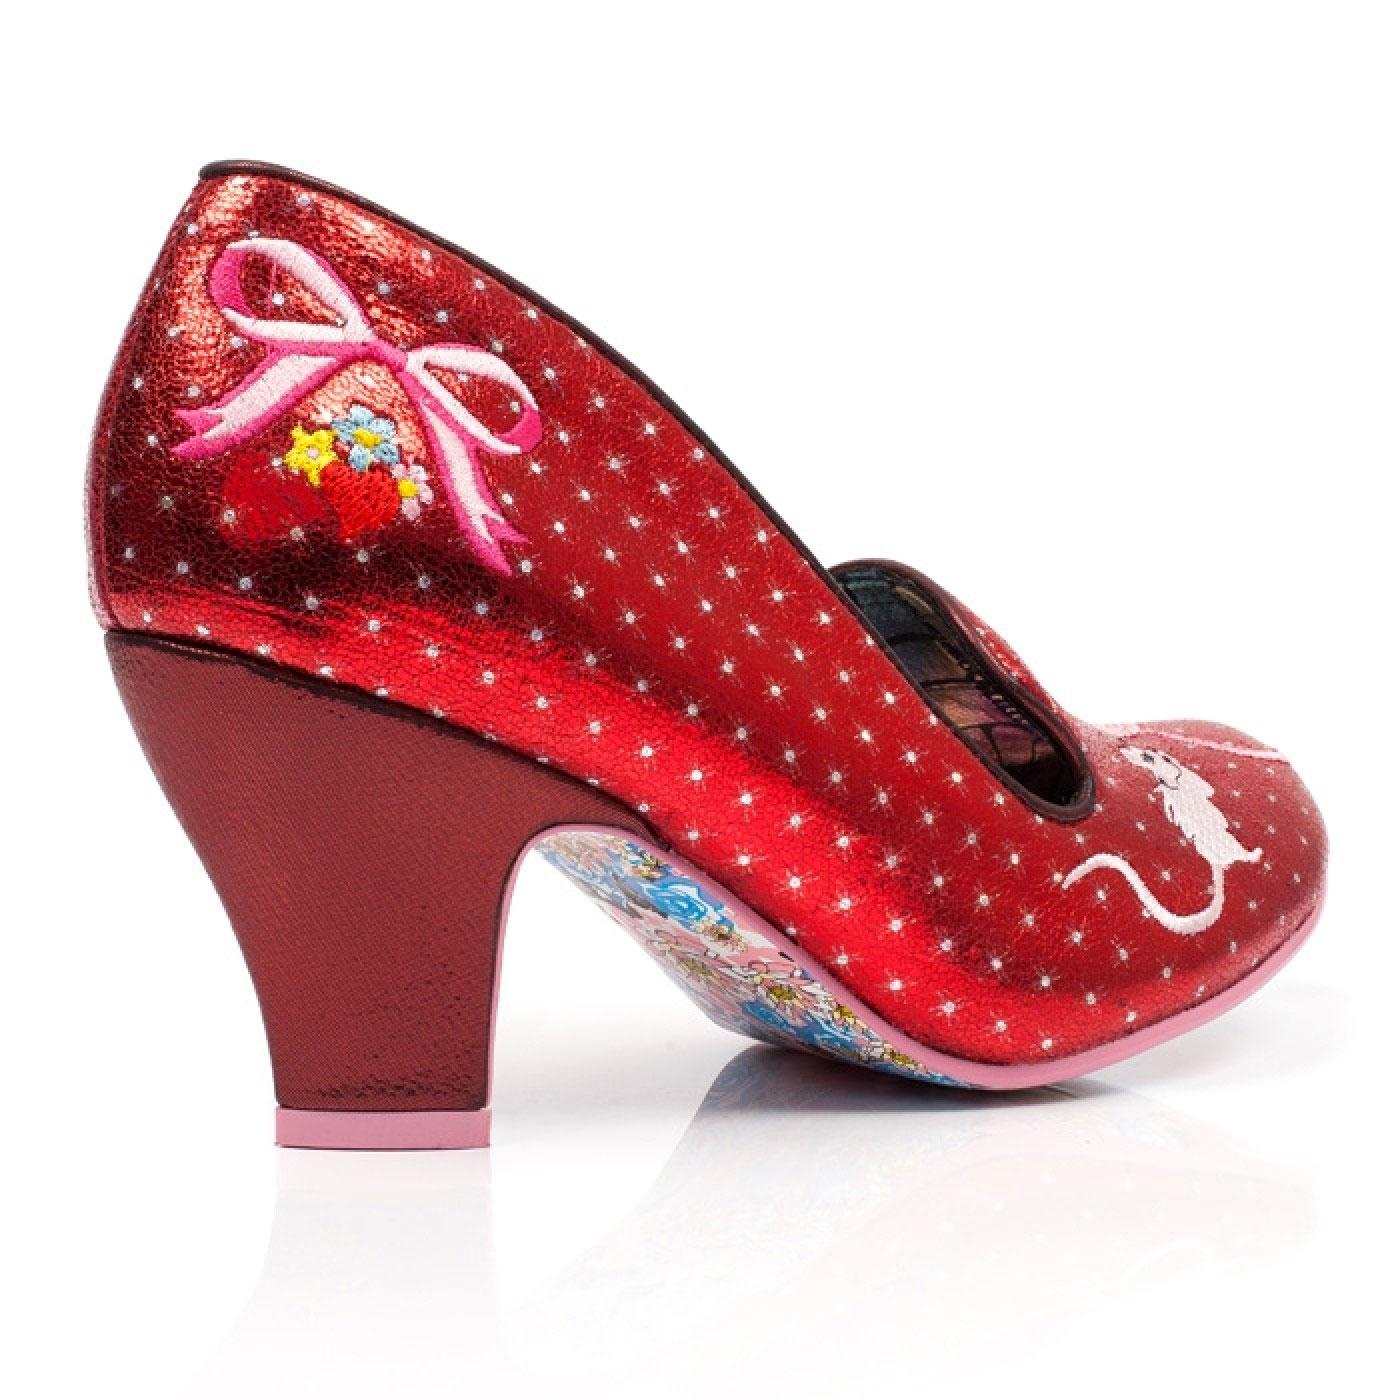 IRREGULAR CHOICE Fuzzy Peg Kitty Shoes in Shiny Red